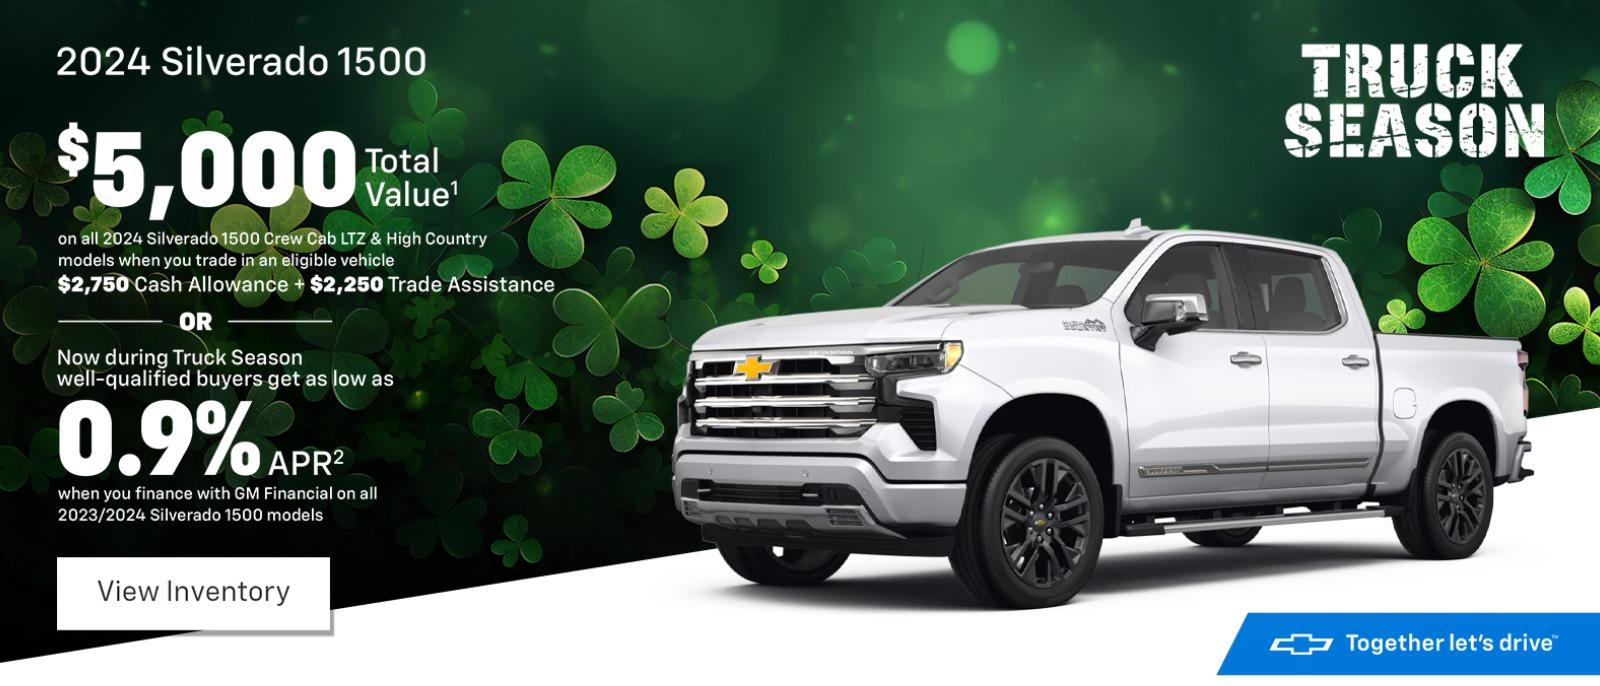 $5,000 Total Value¹ on all 2024 Silverado 1500 Crew Cab LTZ & High Country models when you trade in an eligible vehicle $2,750 Cash Allowance + $2,250 Trade Assistance OR Now during Truck Season well-qualified buyers get as low as 0.9% APR² when you finance with GM Financial on all 2023/2024 Silverado 1500 models